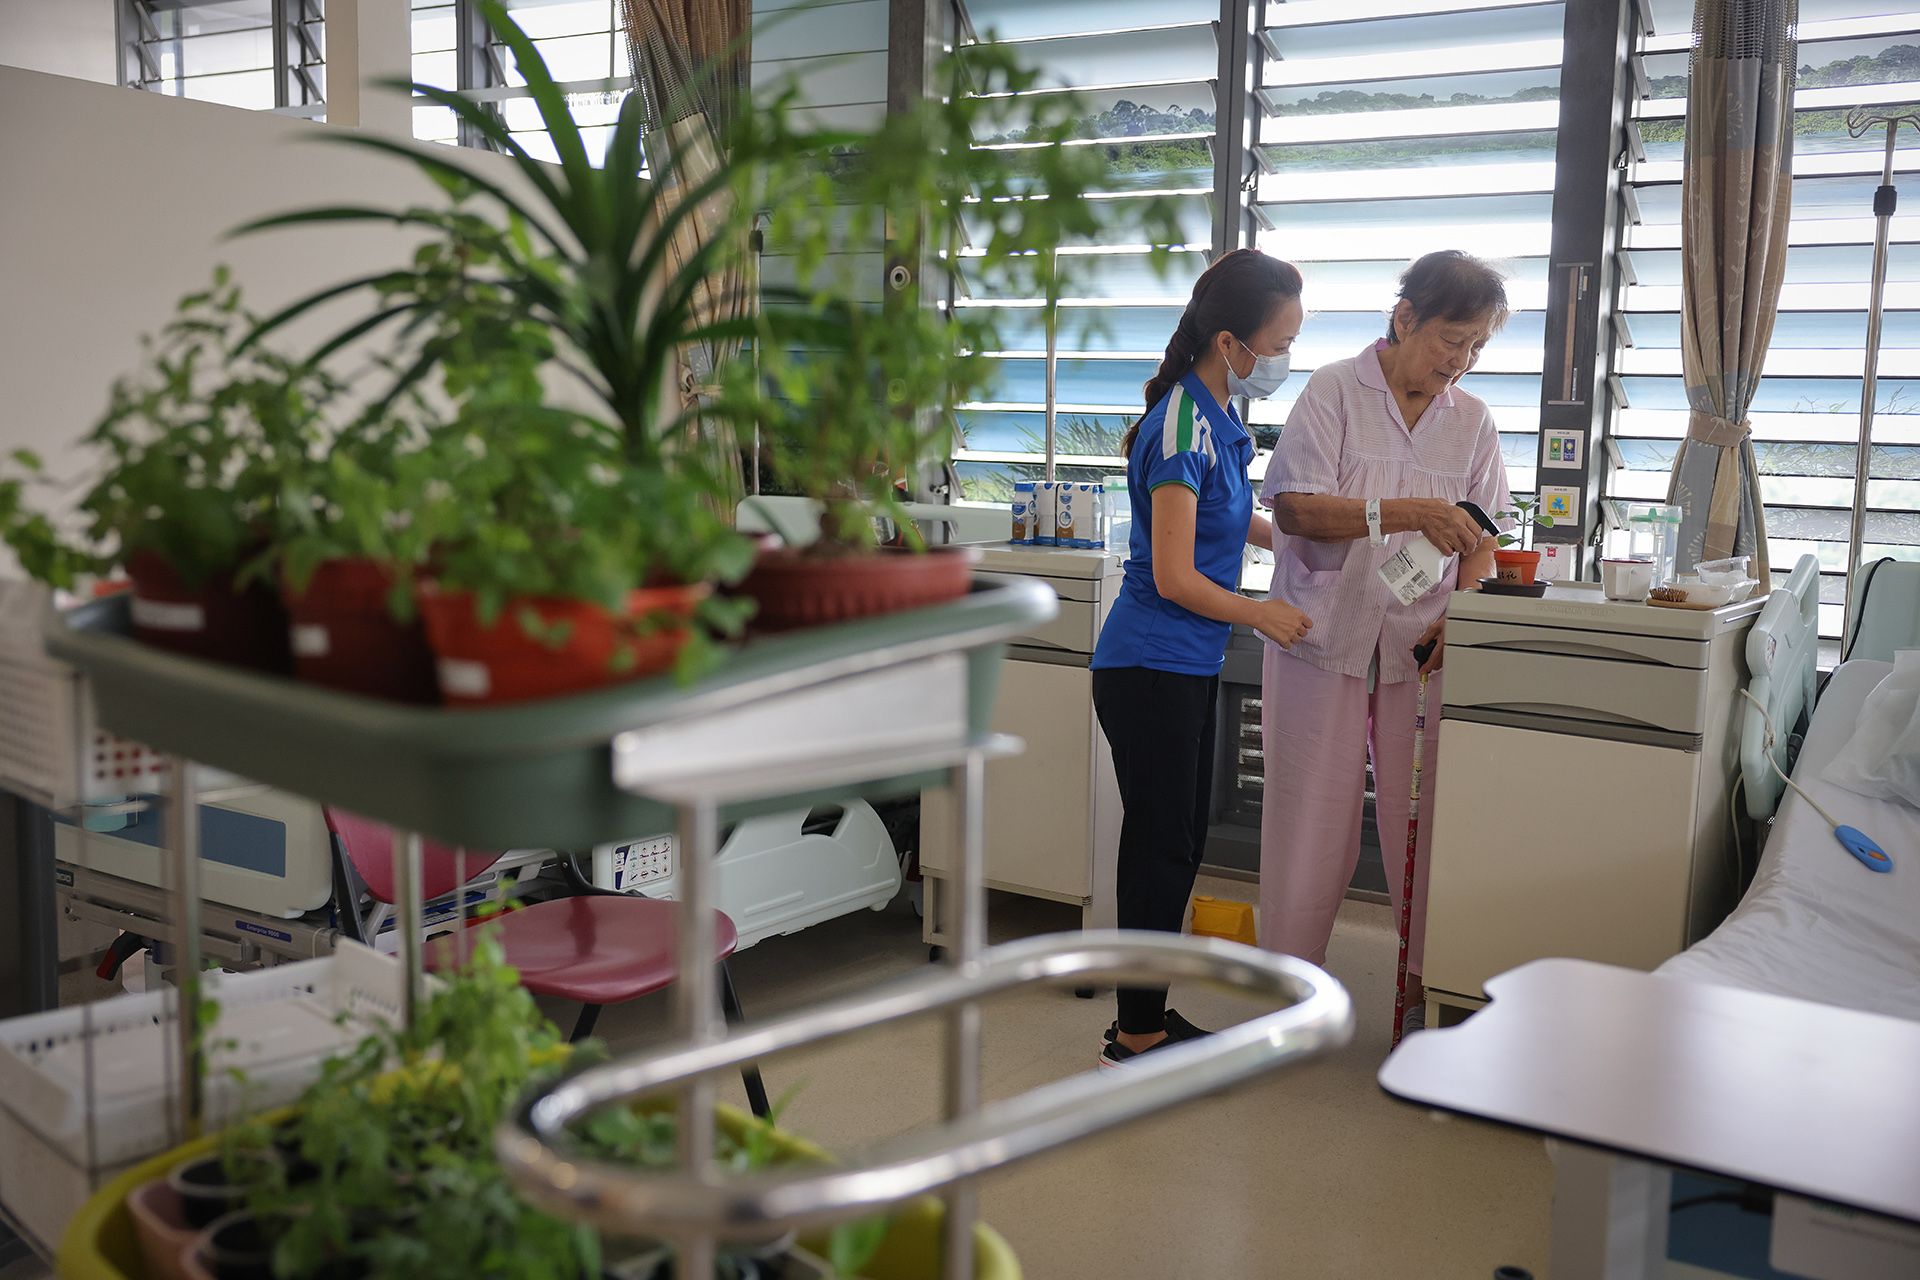 Madam Sim Boon Hway (right), 90, standing next to her bed and using a spray bottle to water the plant that she transplanted herself moments ago.